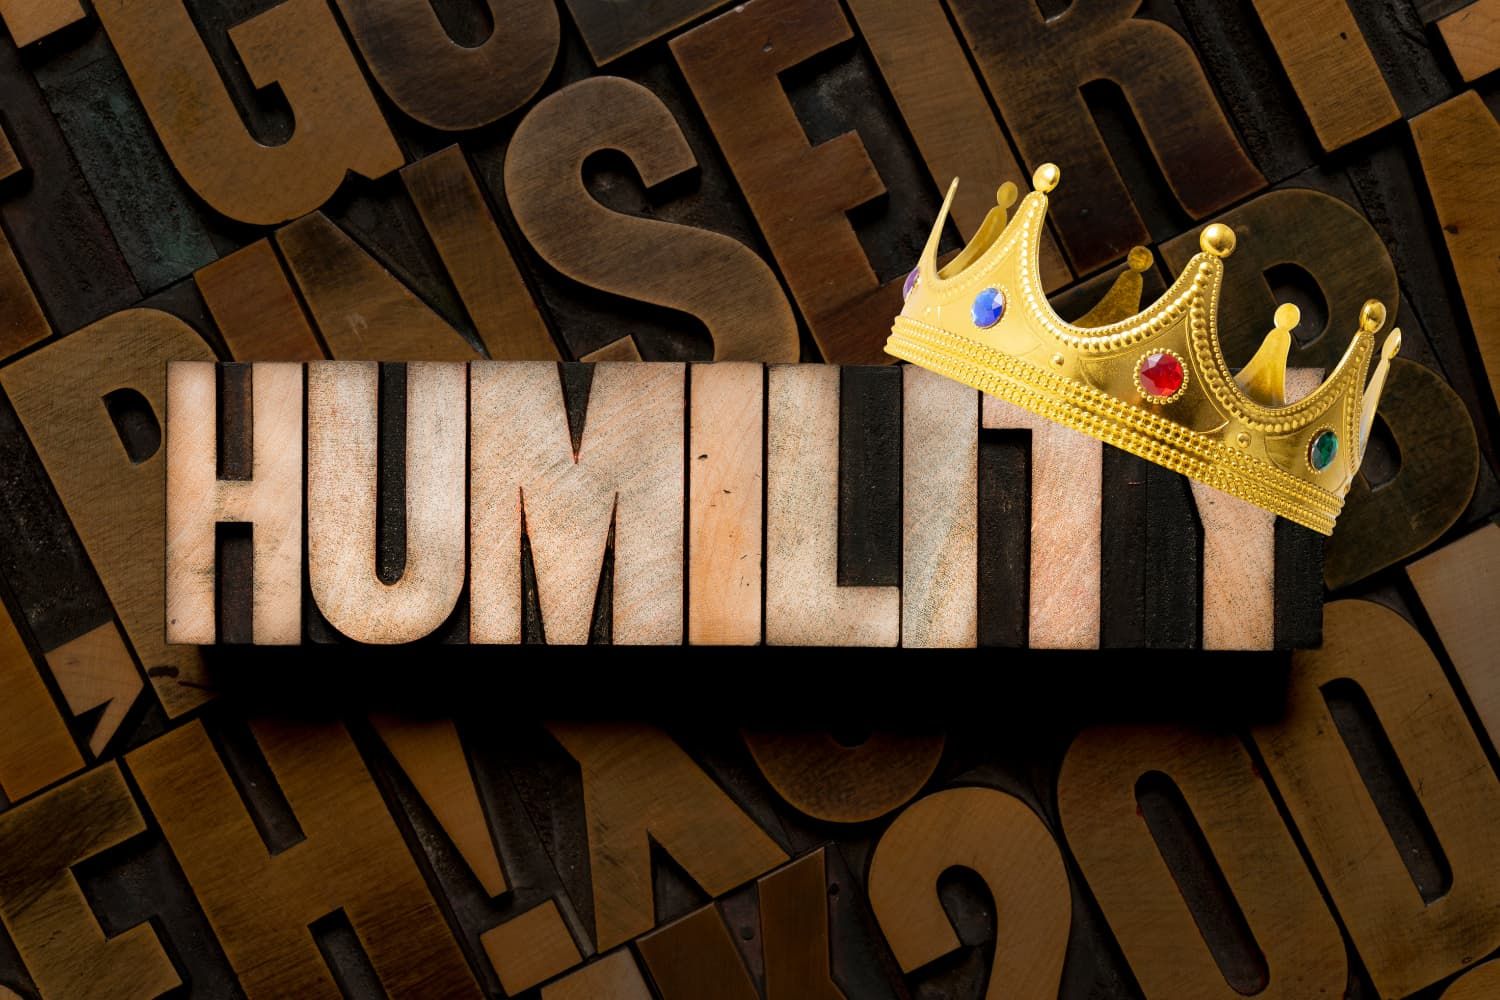 Prayer%20-%20NT%20Philippians%20-%20Crowns%20of%20humility-b83f3a0b Encouragement